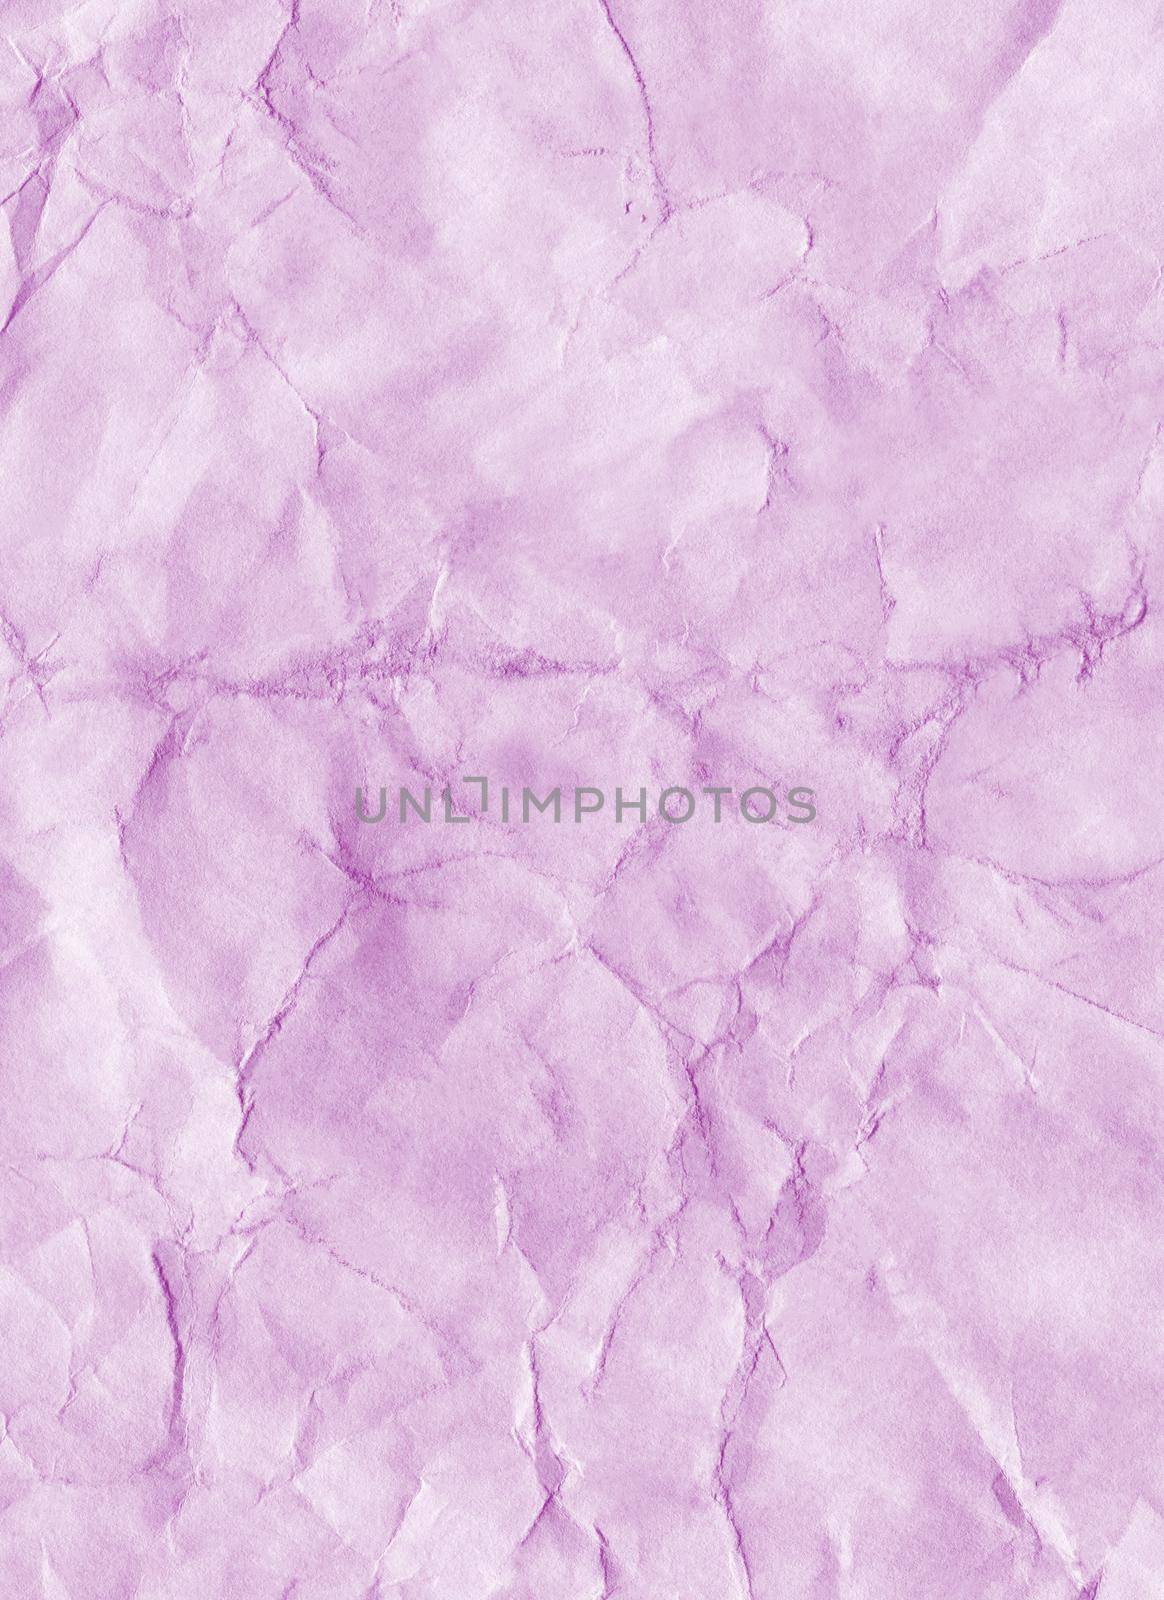 Abstract Purple Watercolor Background. Purpur Watercolor Texture. Abstract Watercolor Violet Hand Painted Background. Old Purple Digital Paper. Vintage textured grunge background.